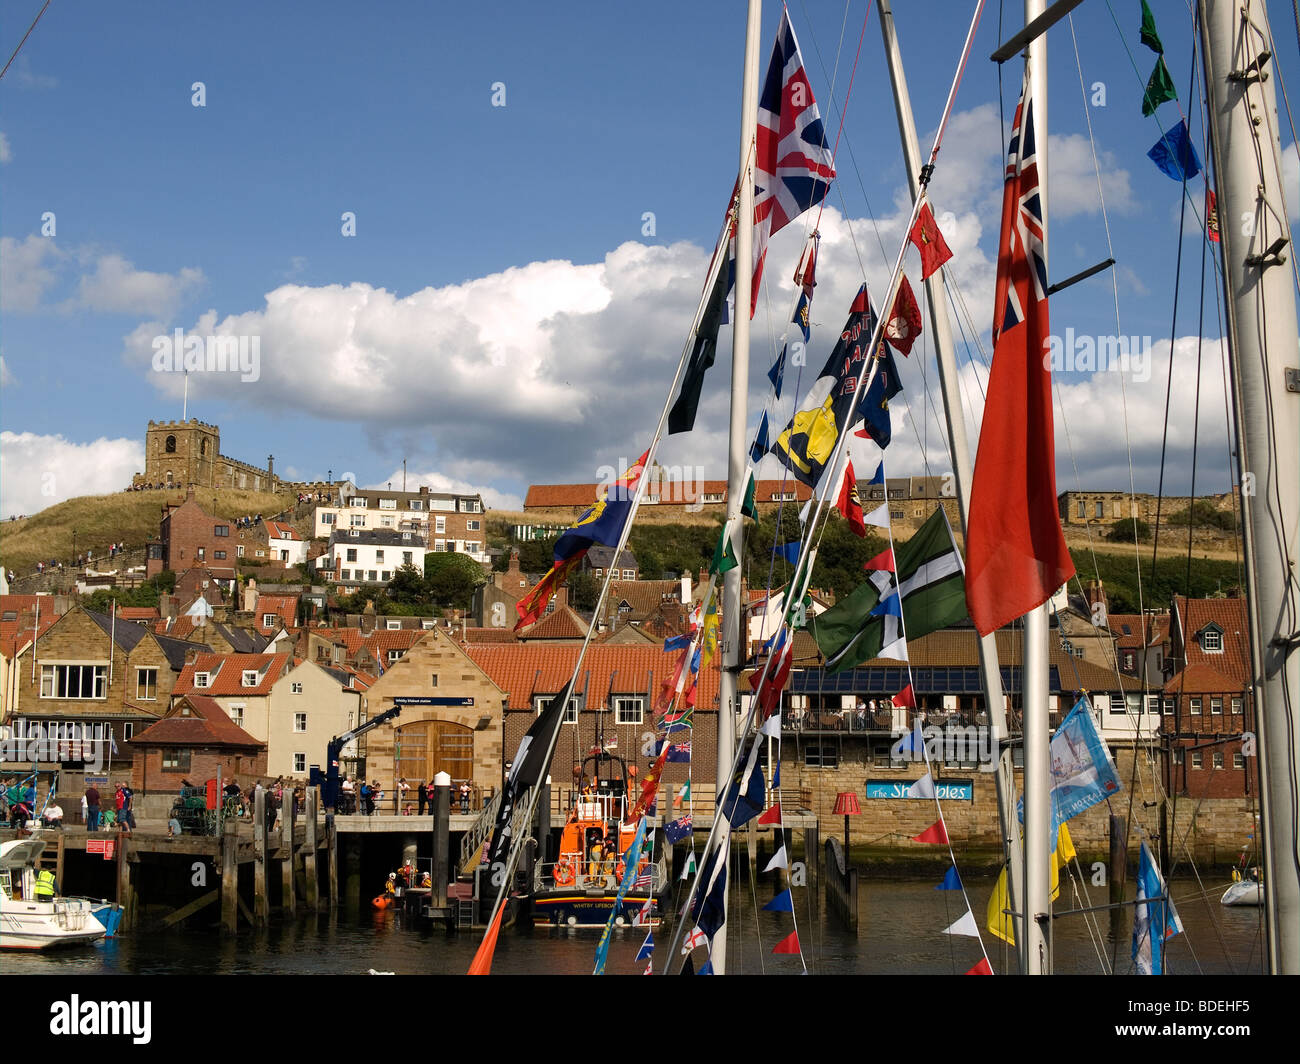 Whitby town seen through flags and bunting on yachts in harbour for the 169th annual Regatta August 2009 Stock Photo